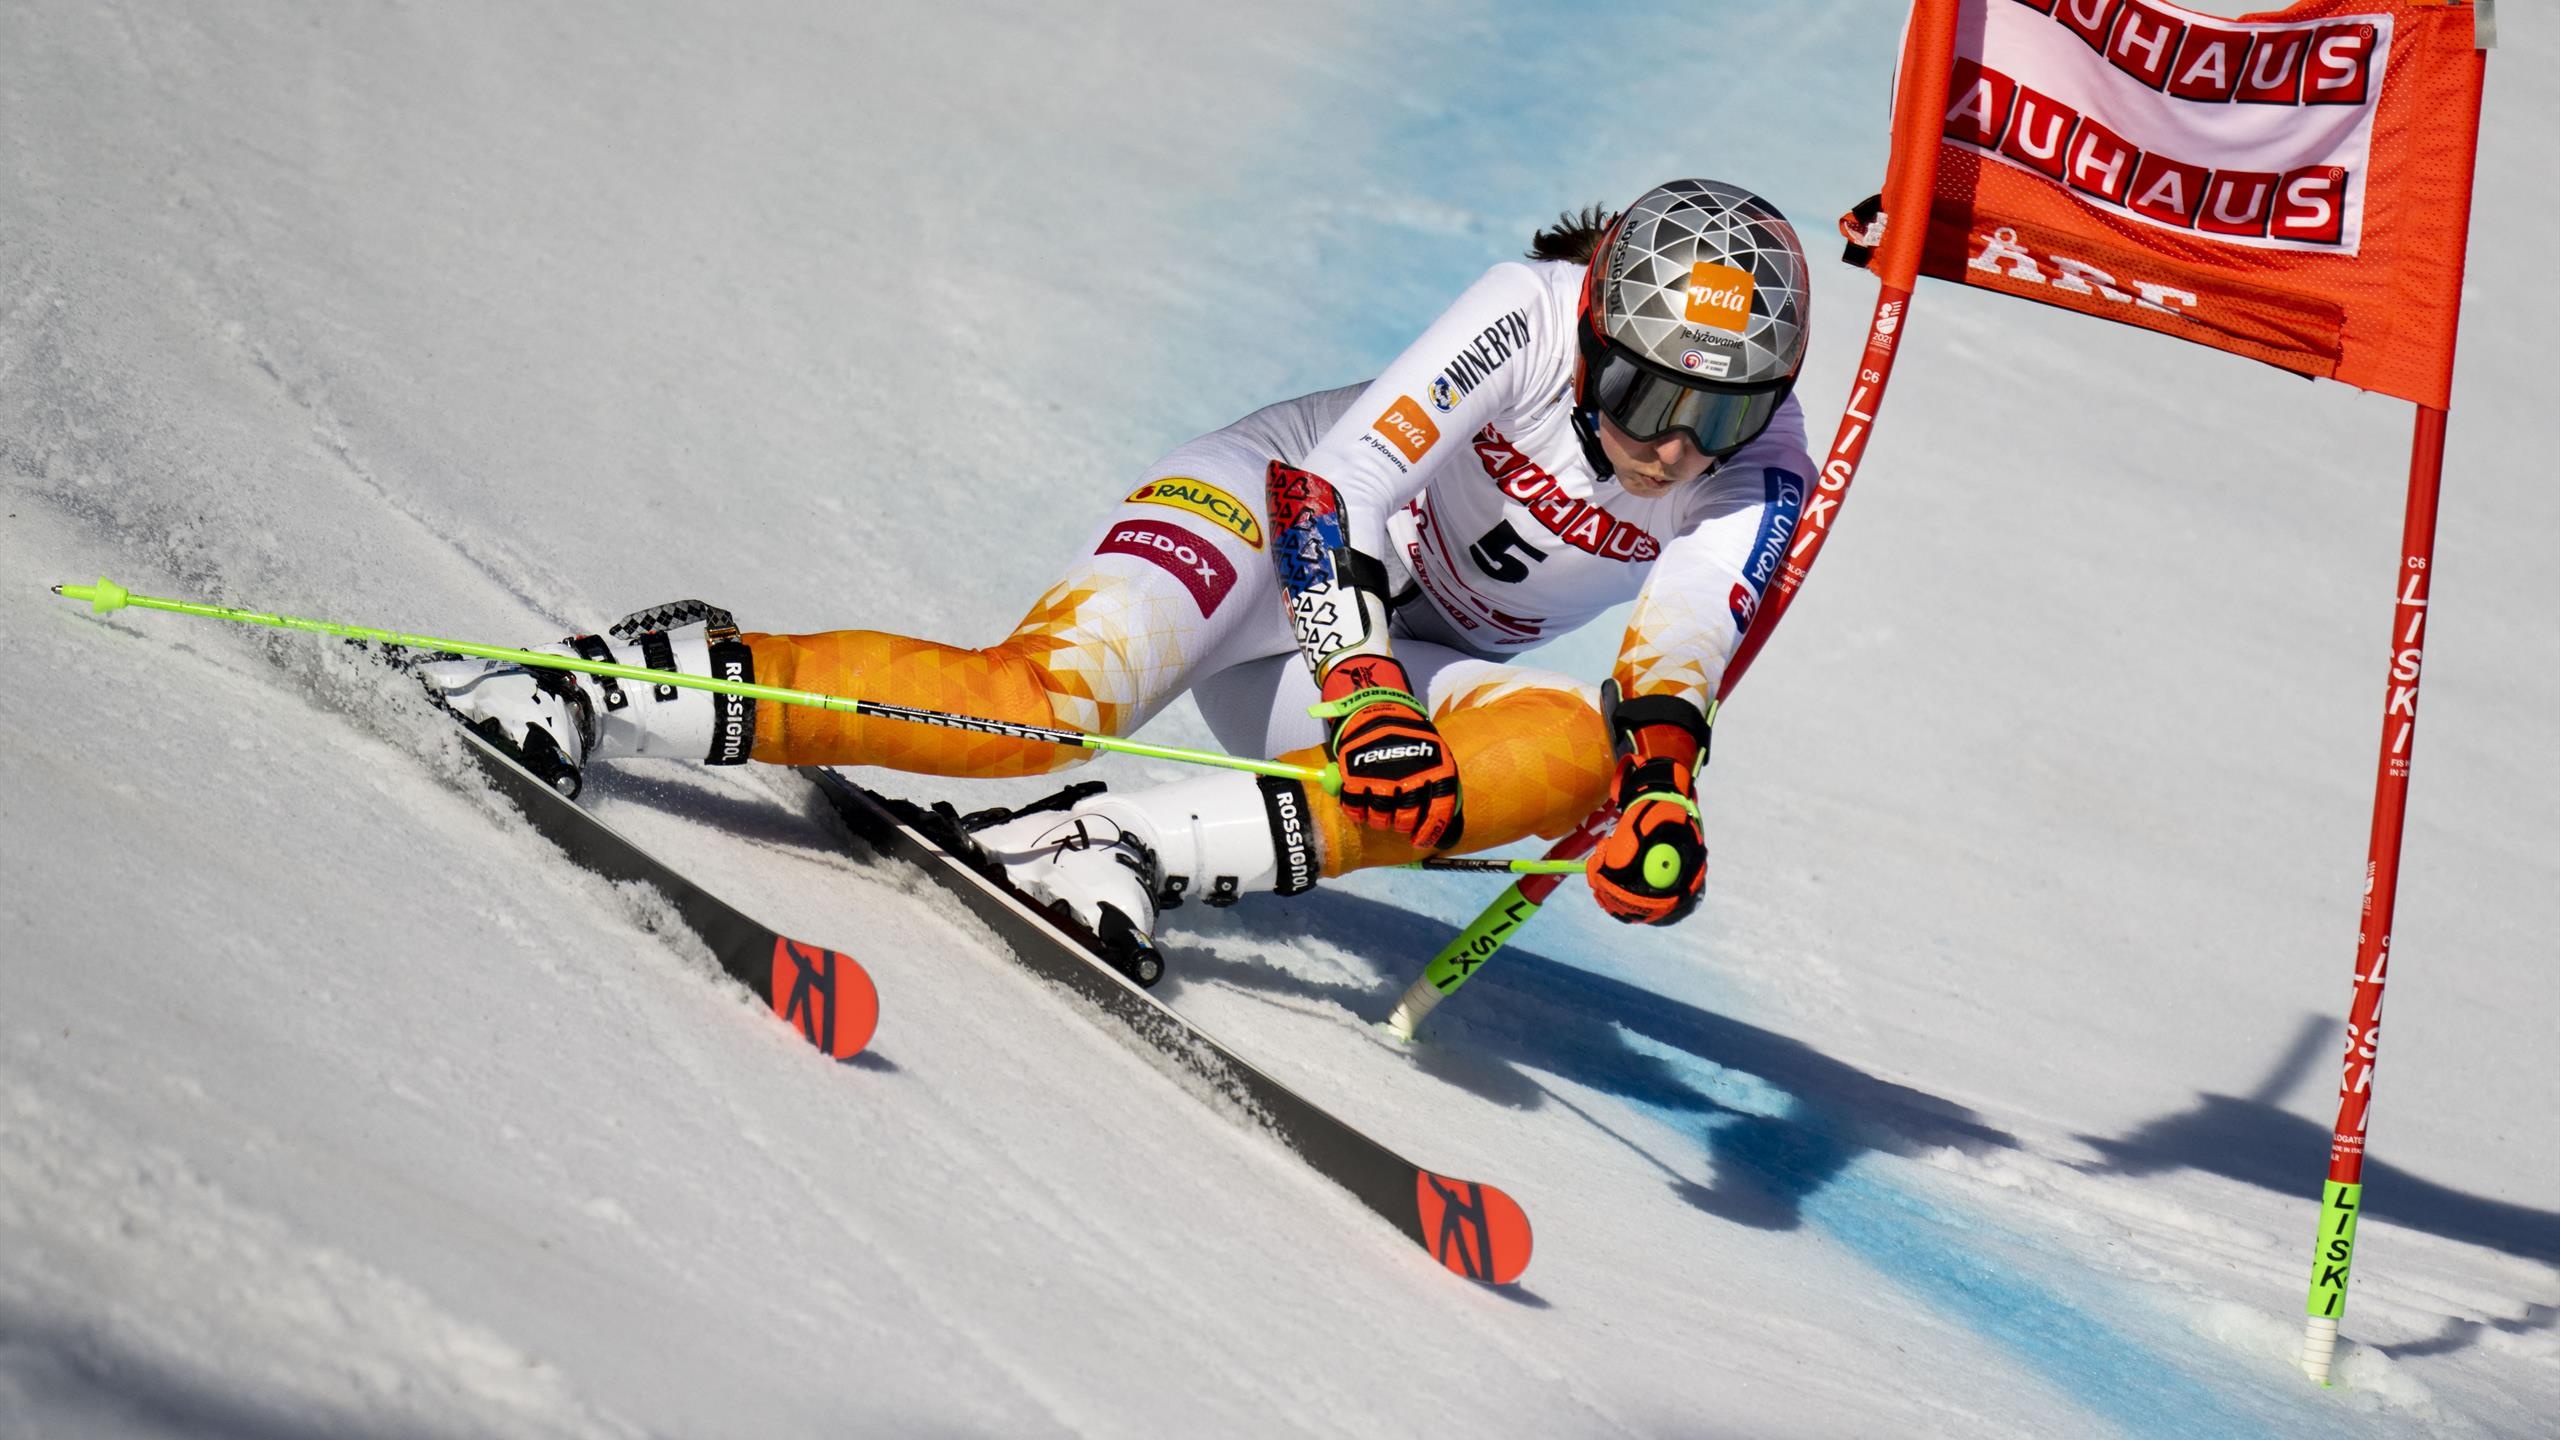 Alpine Skiing: A race on skis over a winding course that is marked by gates, Downhill. 2560x1440 HD Wallpaper.